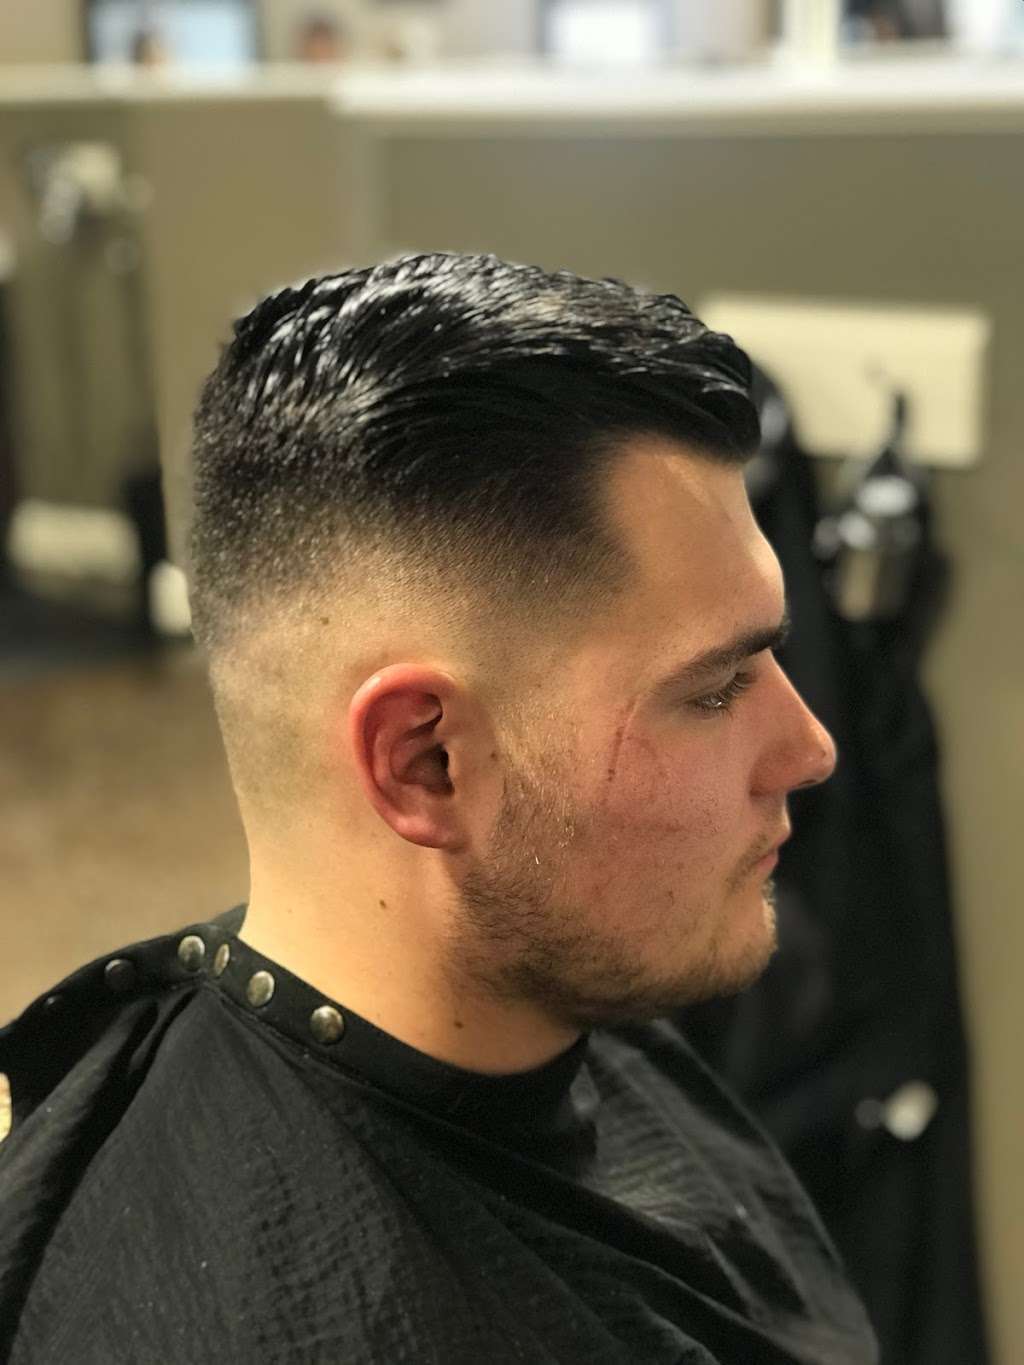 Men’s Hair House | 8841 W North Ave, Wauwatosa, WI 53226, USA | Phone: (414) 539-4633